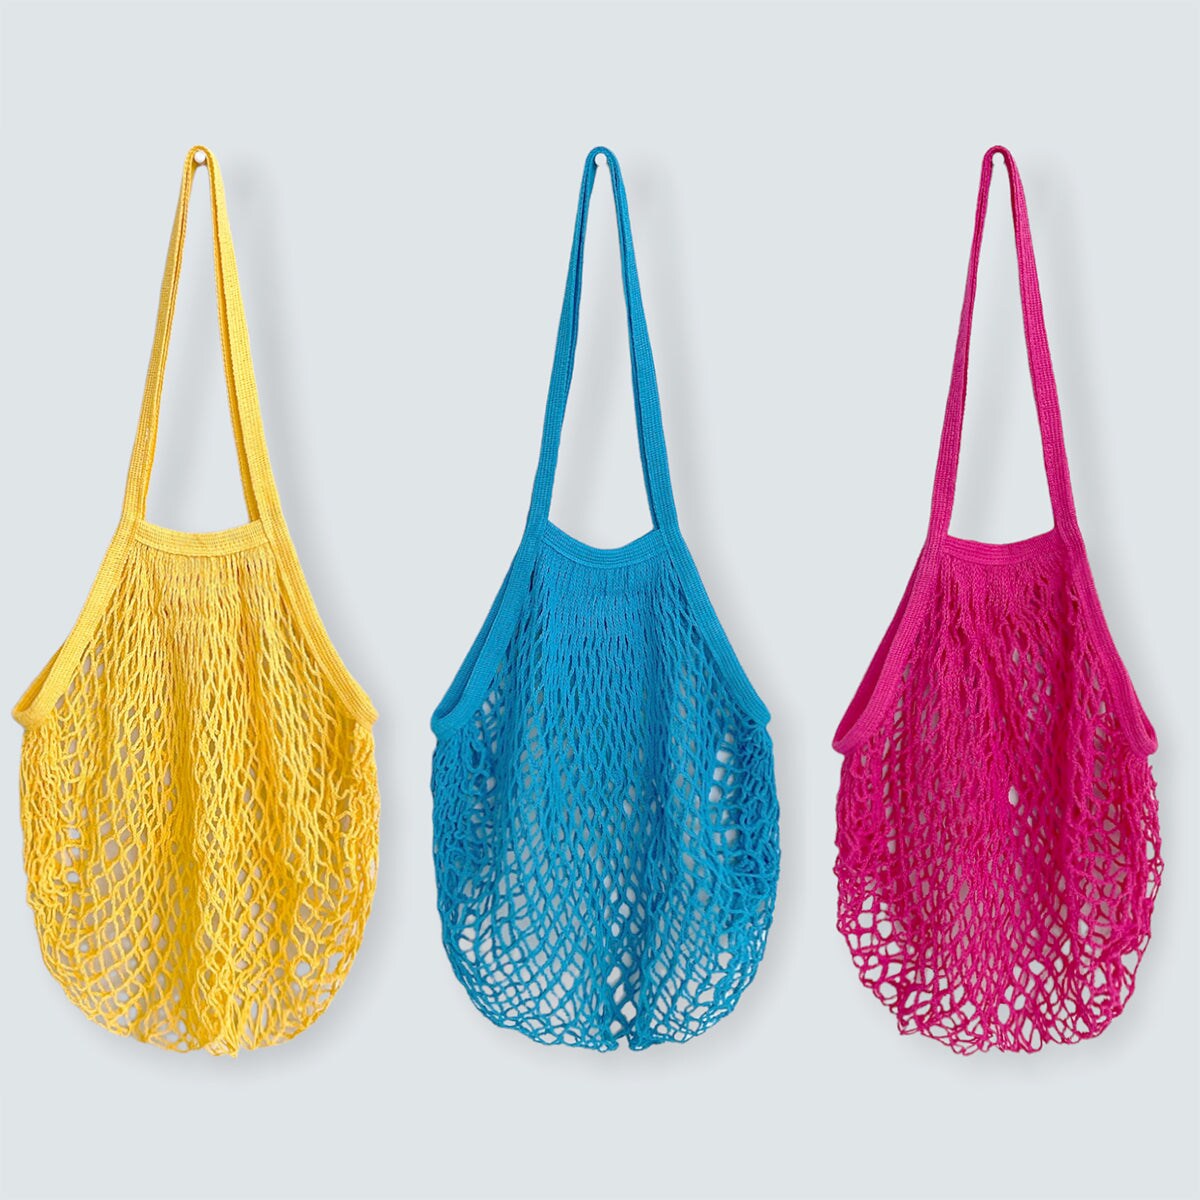 Wrapables Cotton Mesh Net Shopping Bag, Grocery Bag for Vegetables, Produce (Set of 3) Yellow/ Blue / Hot Pink